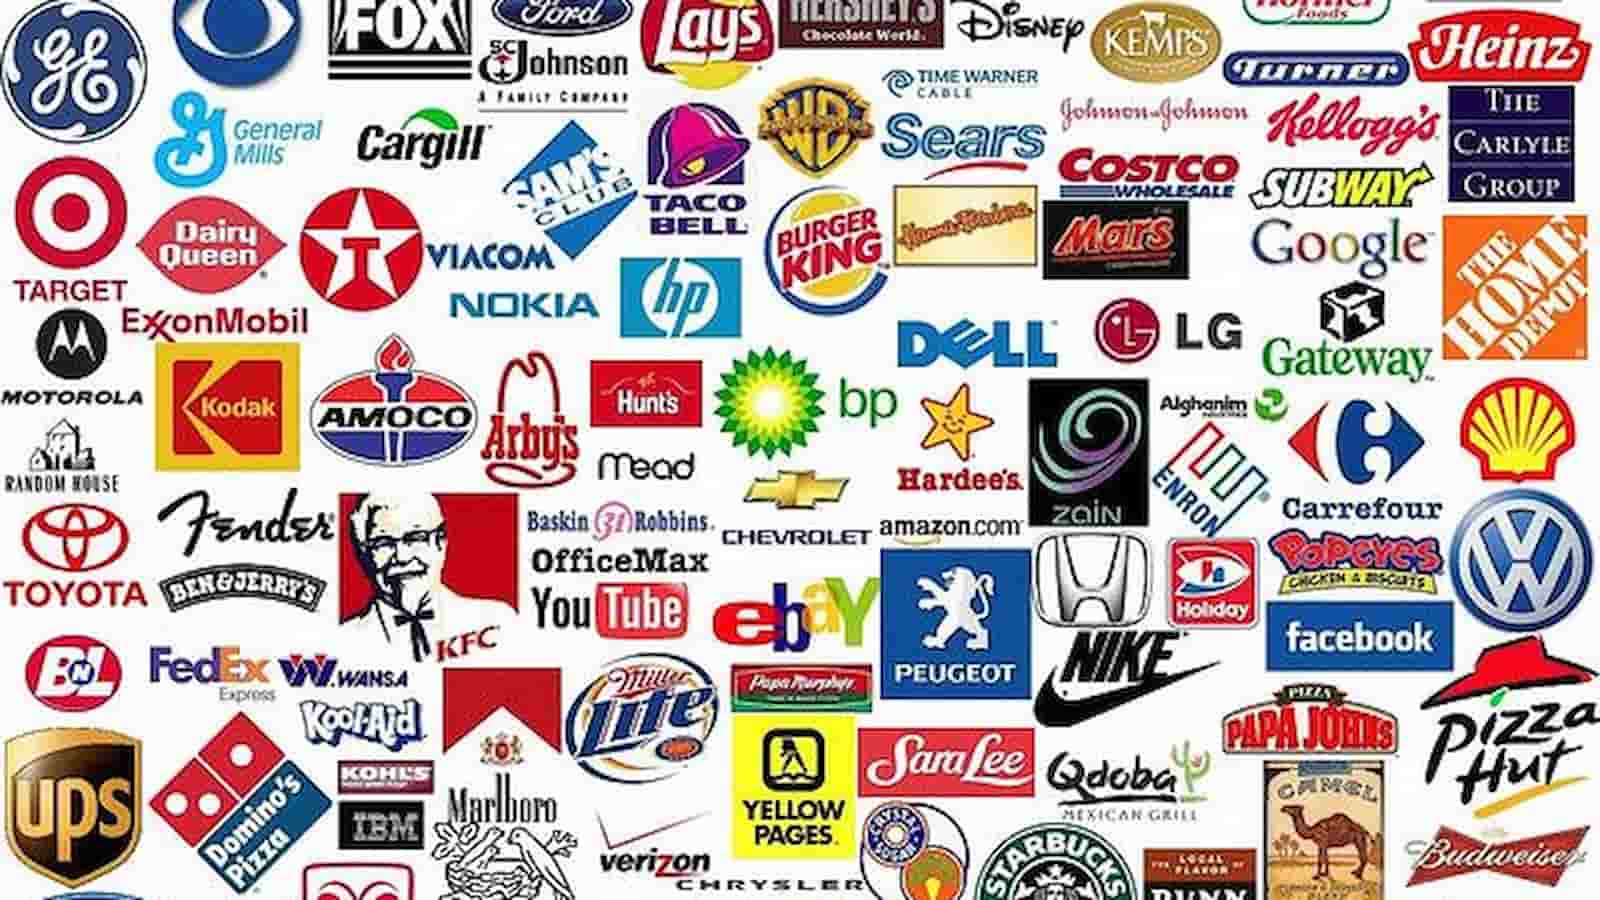 These 8 American brands are owned by foreign companies